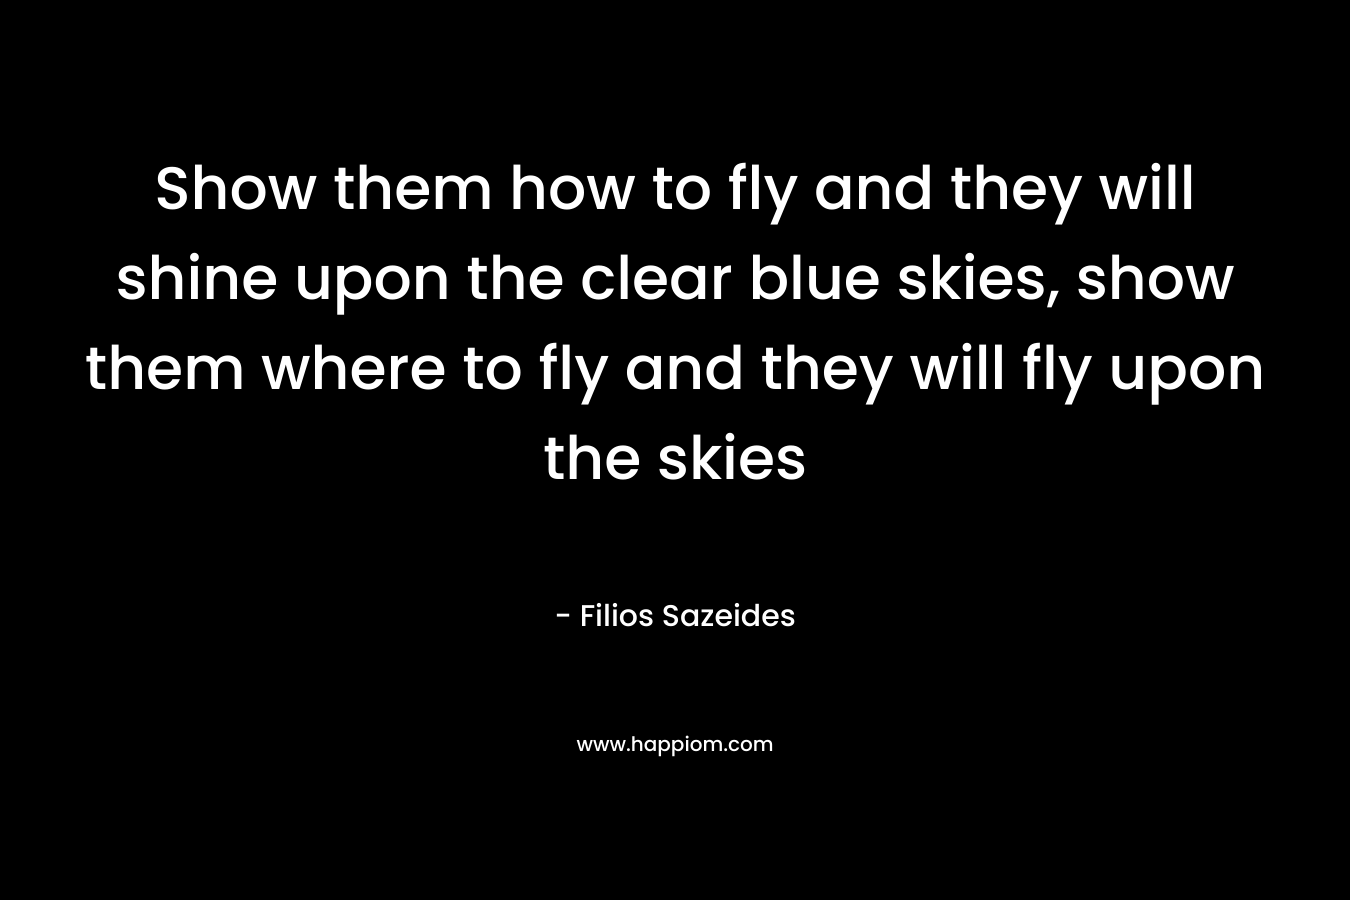 Show them how to fly and they will shine upon the clear blue skies, show them where to fly and they will fly upon the skies – Filios Sazeides